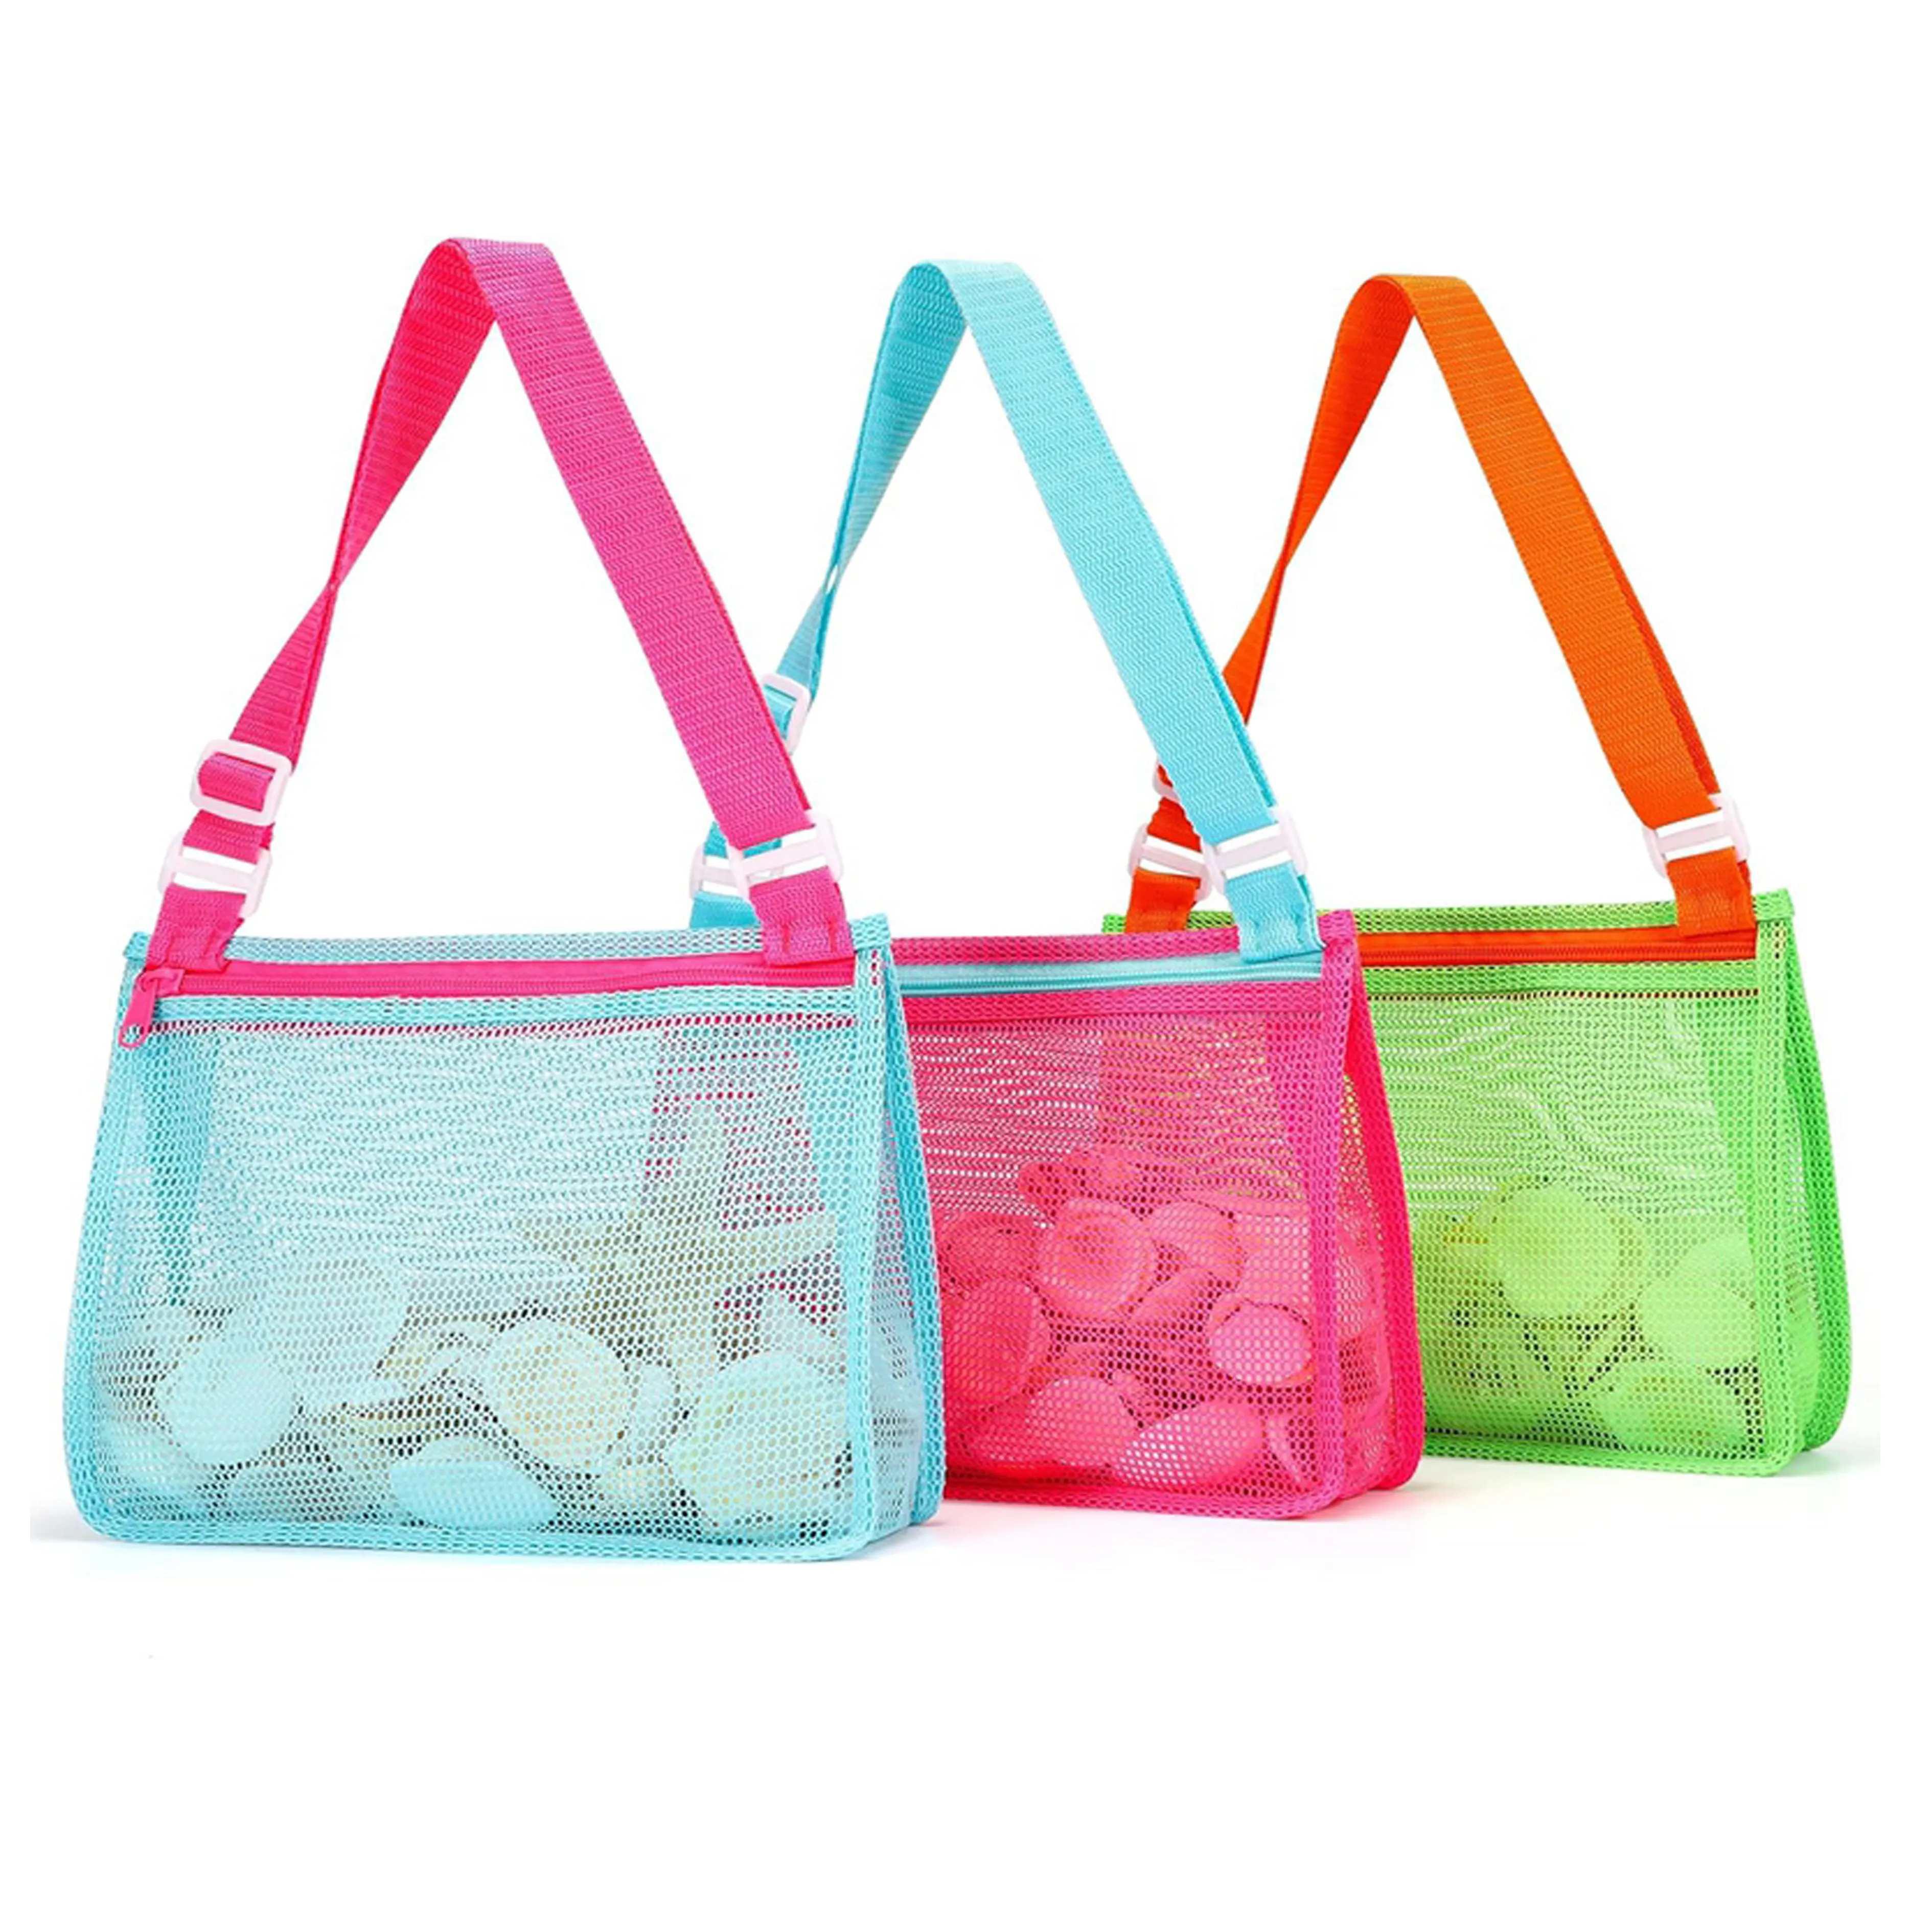 Custom Mesh Beach Bags for Toys Storage Pouch Transparent Totebags with Adjustable Carrying Straps for Girls Travel Tote Bags